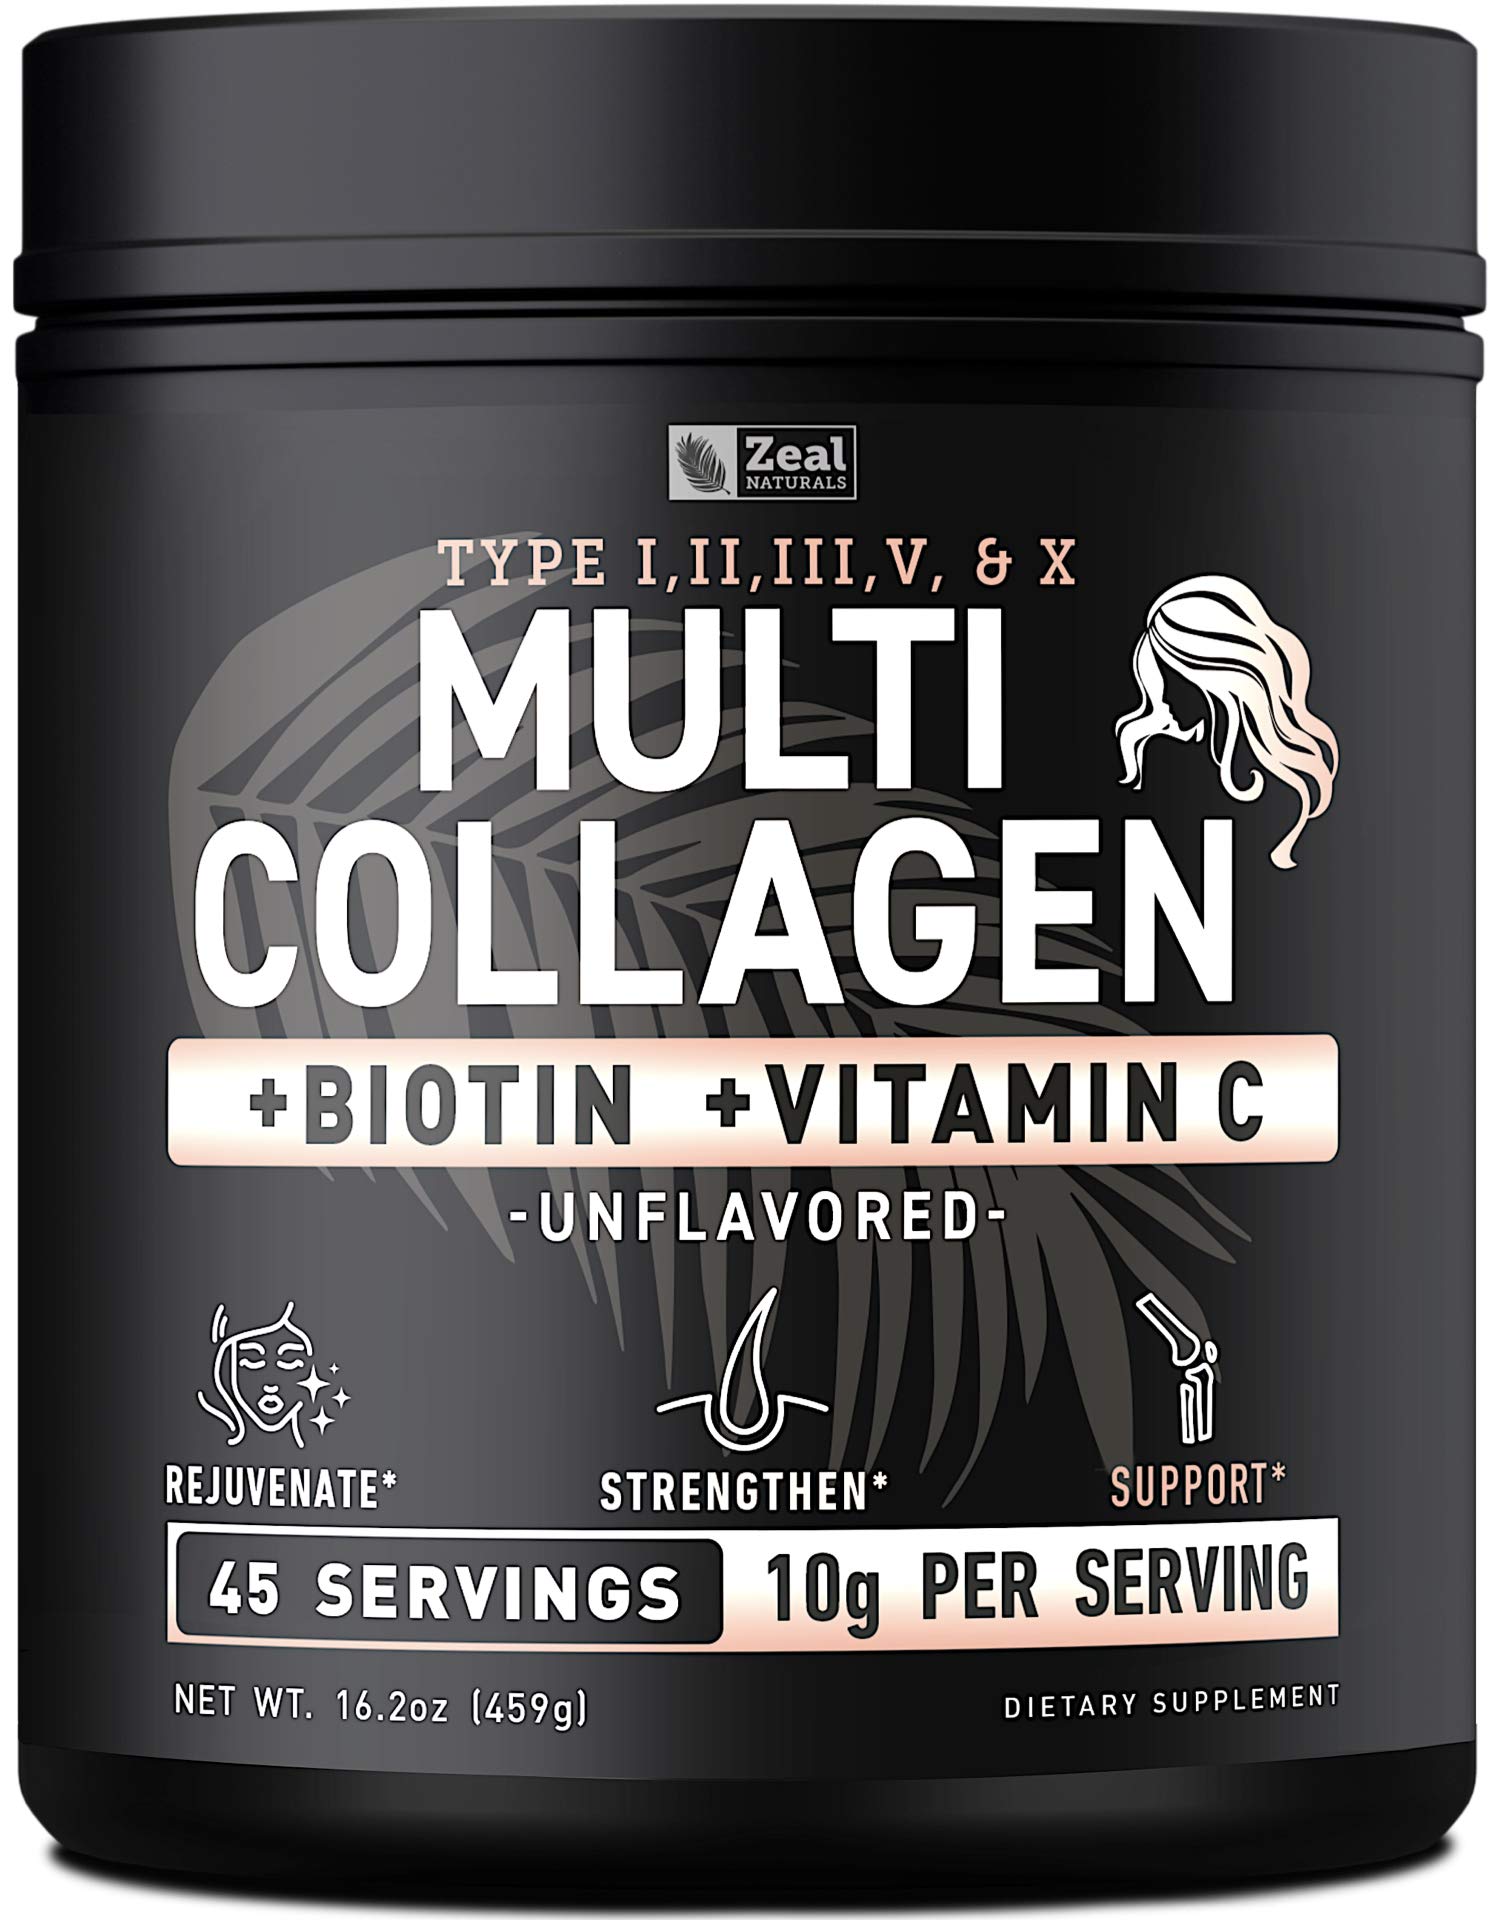 Premium Multi Collagen Peptides Protein Powder (1, 2, 3, 5 & 10) with Vitamin C, Biotin, Hyaluronic Acid, for Hair Skin and Nails - Marine, Bovine, Chicken & Eggshell (Unflavored, 45 Servings)